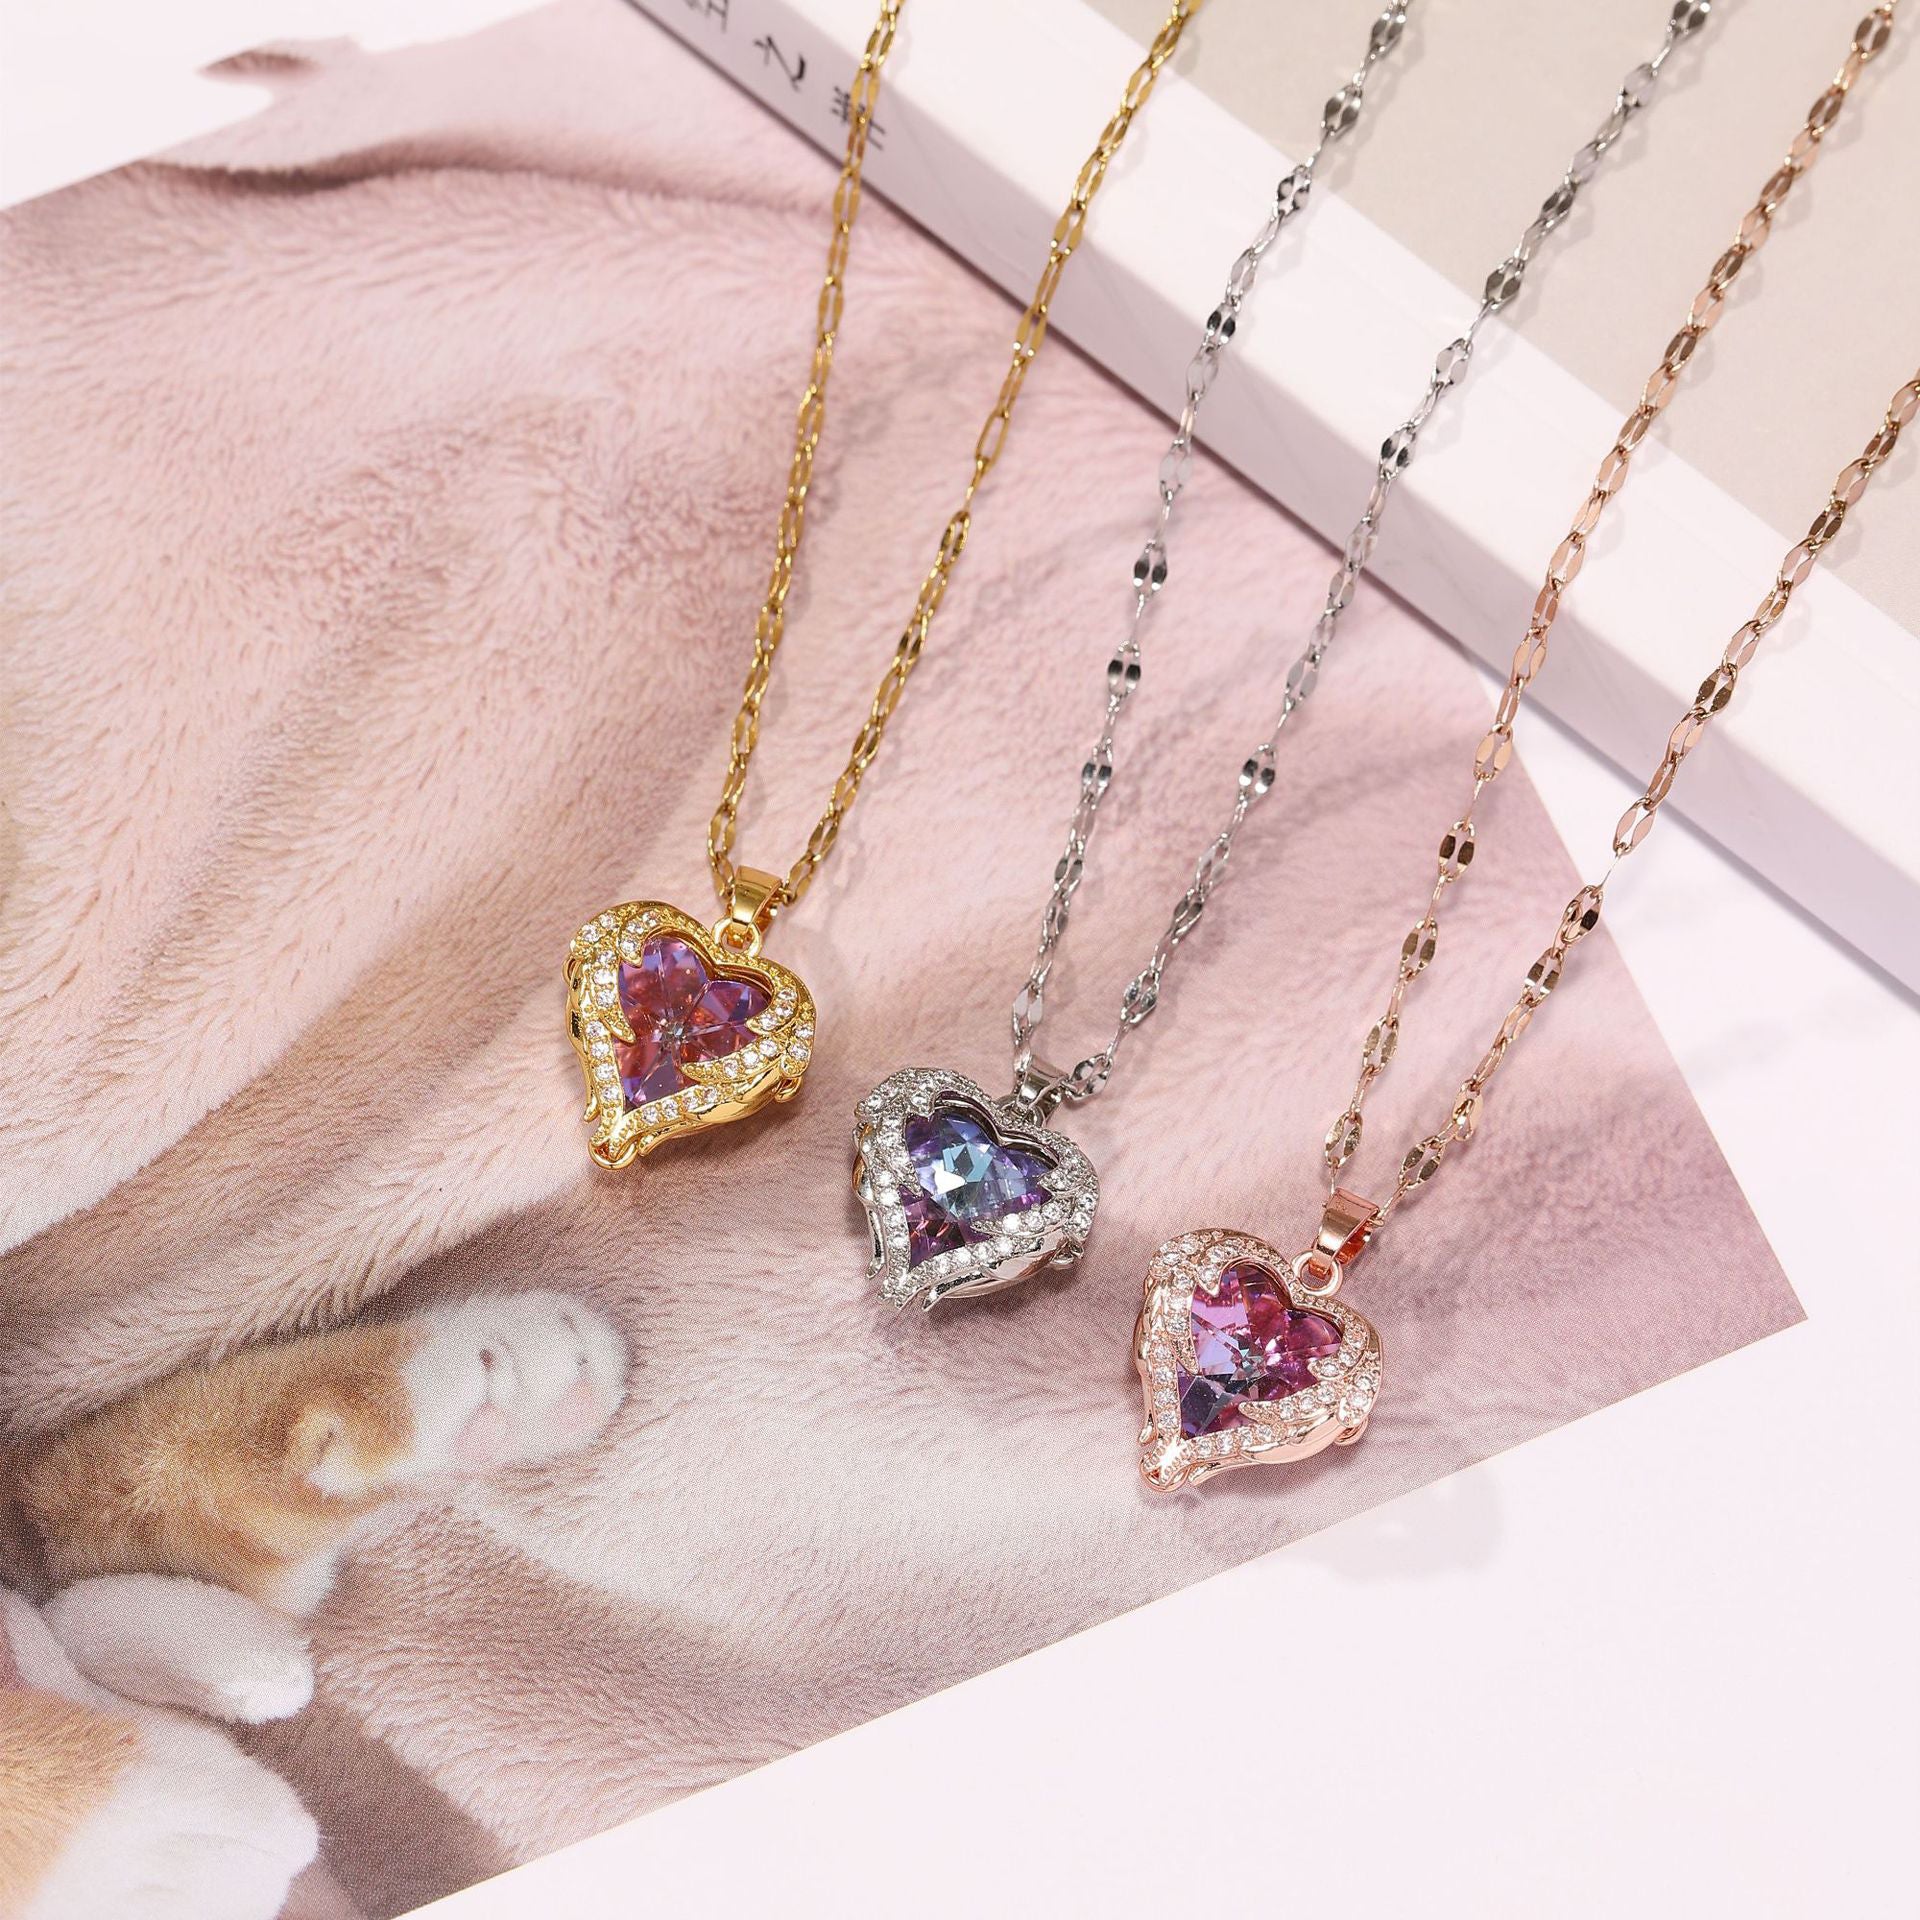 [miallo] Necklace N44 Love Shaped Crystal Necklace